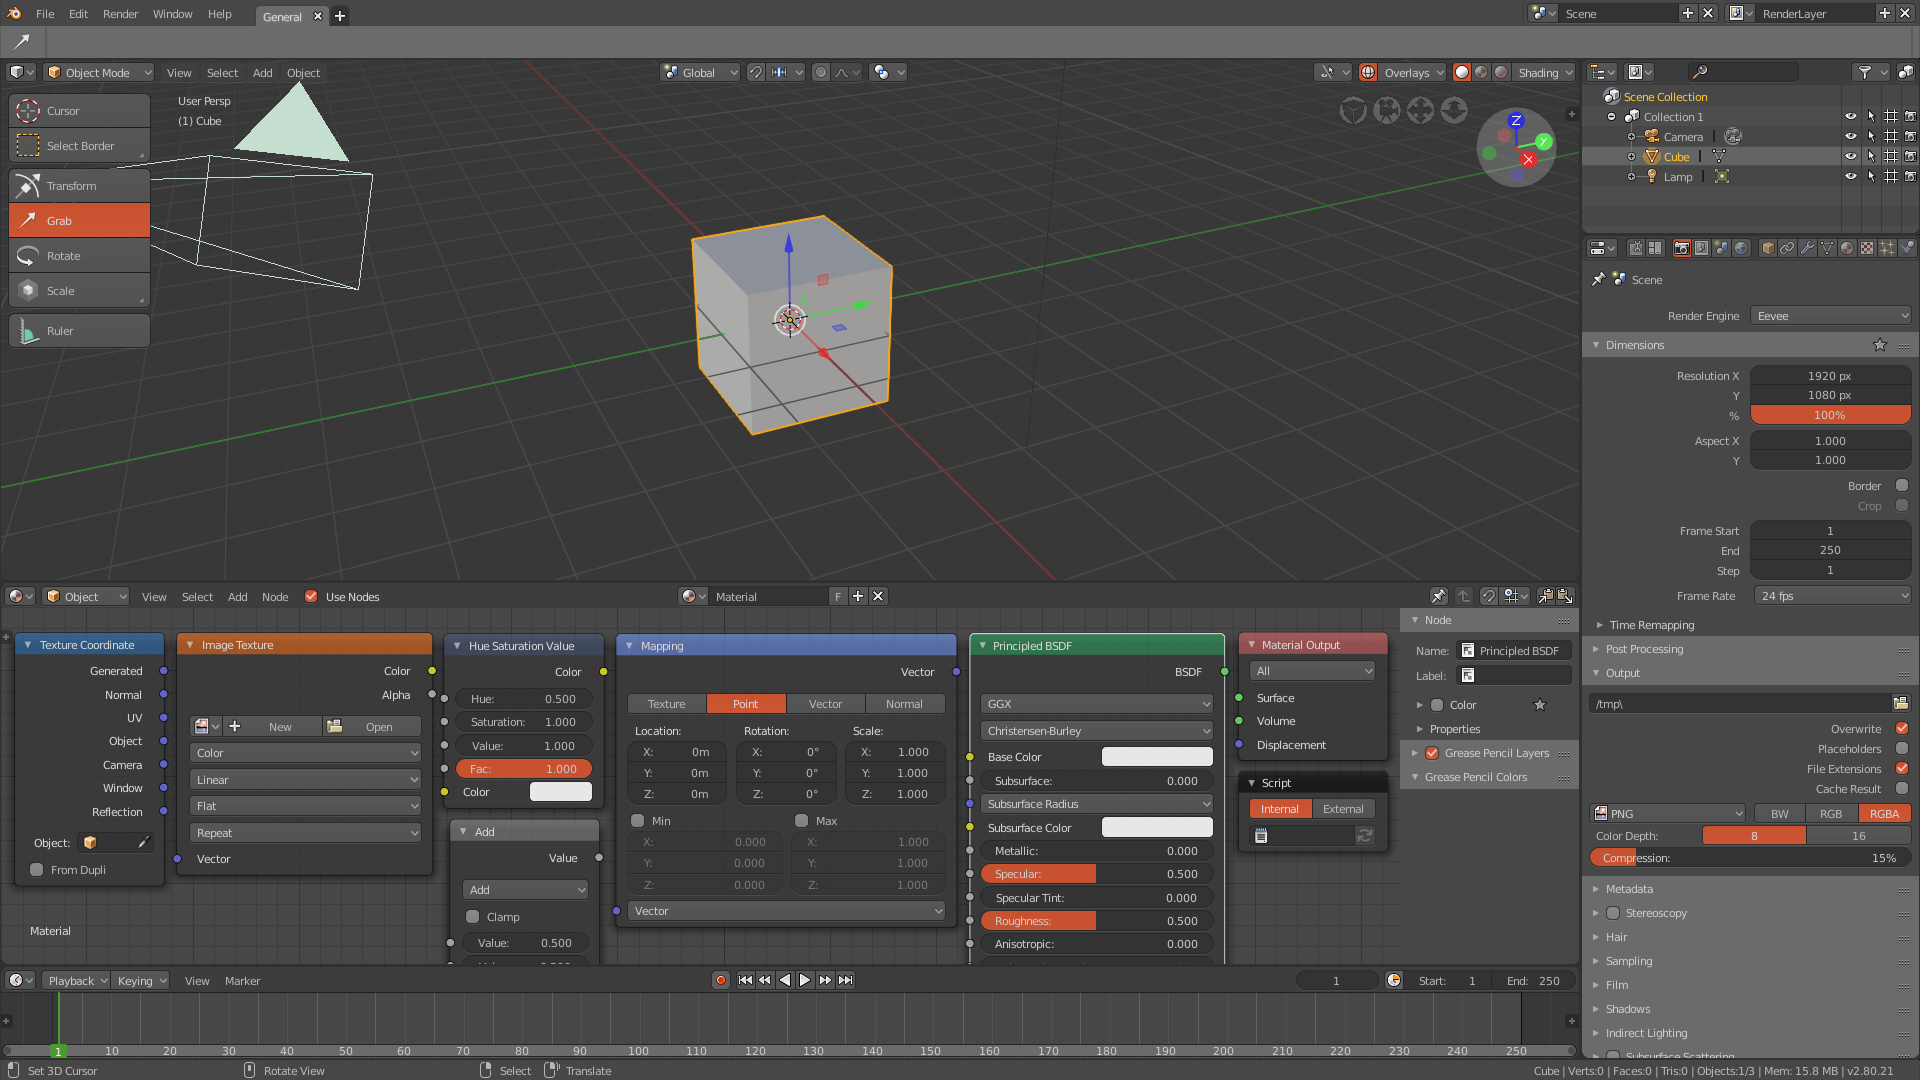 Awesome - Theme for Blender 2.8 - Released Scripts and Themes - Blender Artists Community1920 x 1080